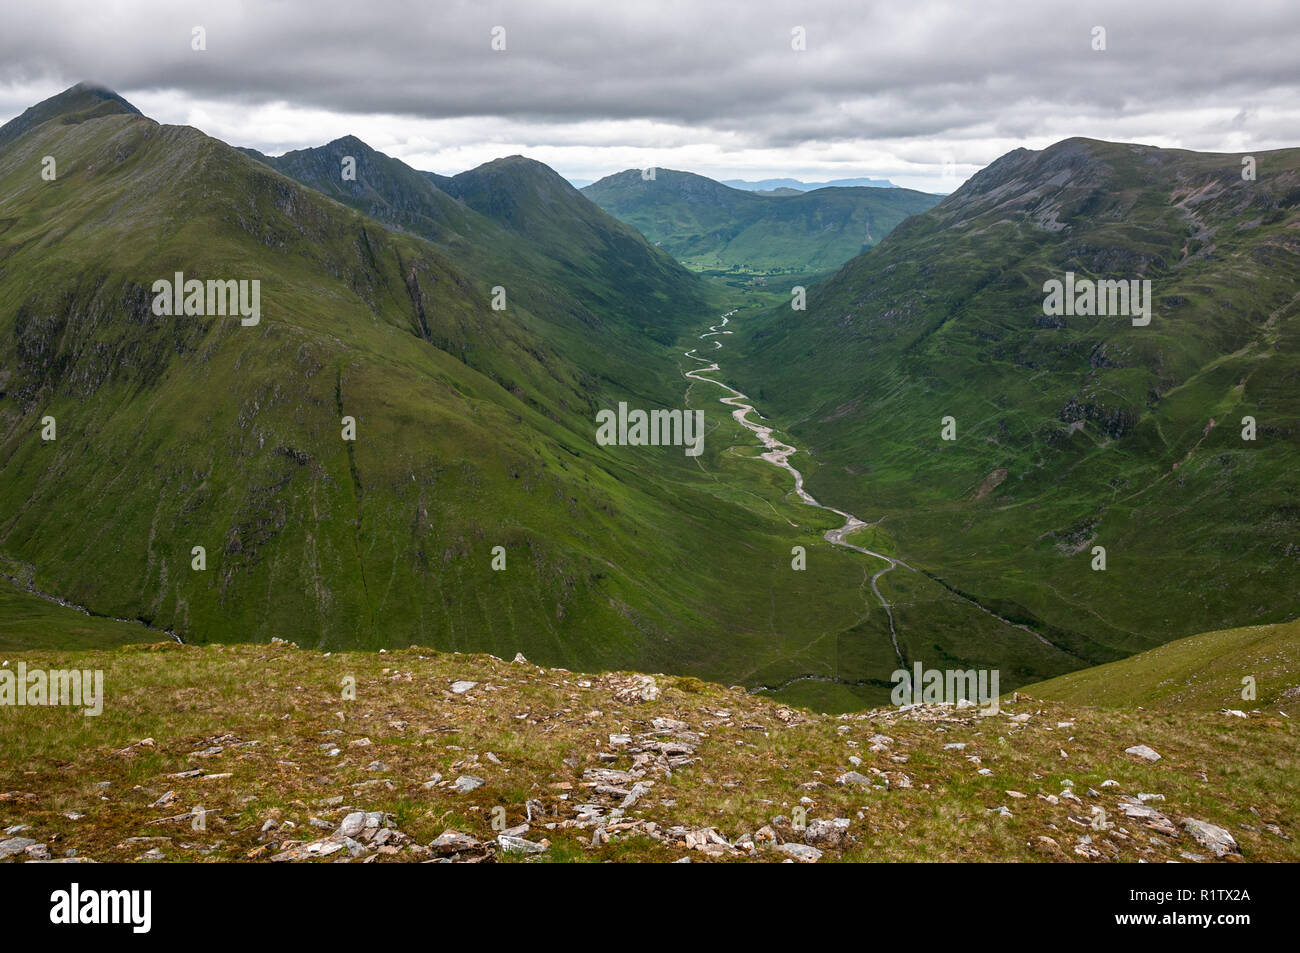 Glen (Gleann) Lichd and the river Croe from the slopes of Meall a Charra, Scotland Stock Photo